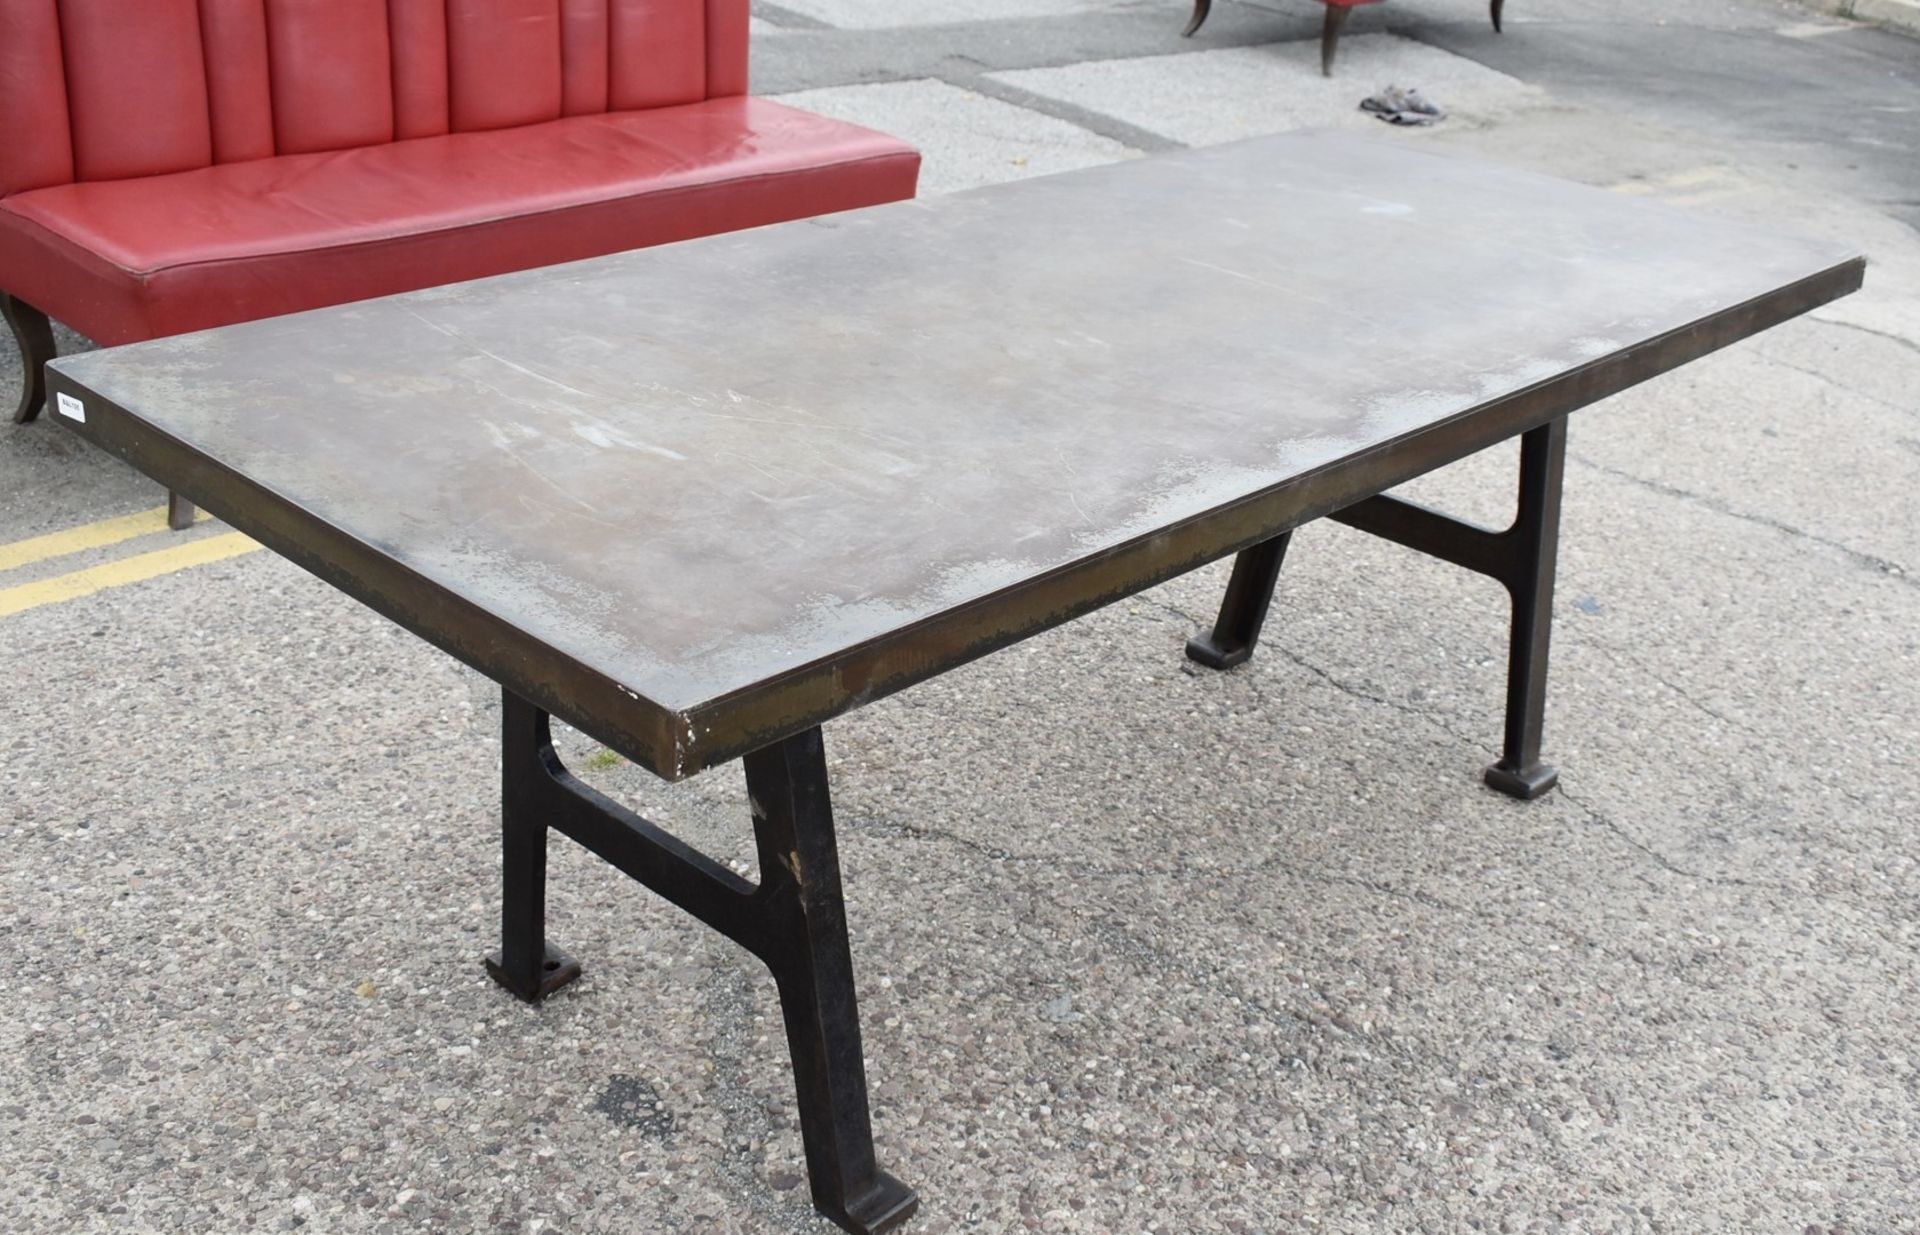 1 x Industrial Style 200cm Banquetting Restaurant Table Featuring a Heavy Steel Top & Steel Legs - Image 9 of 23